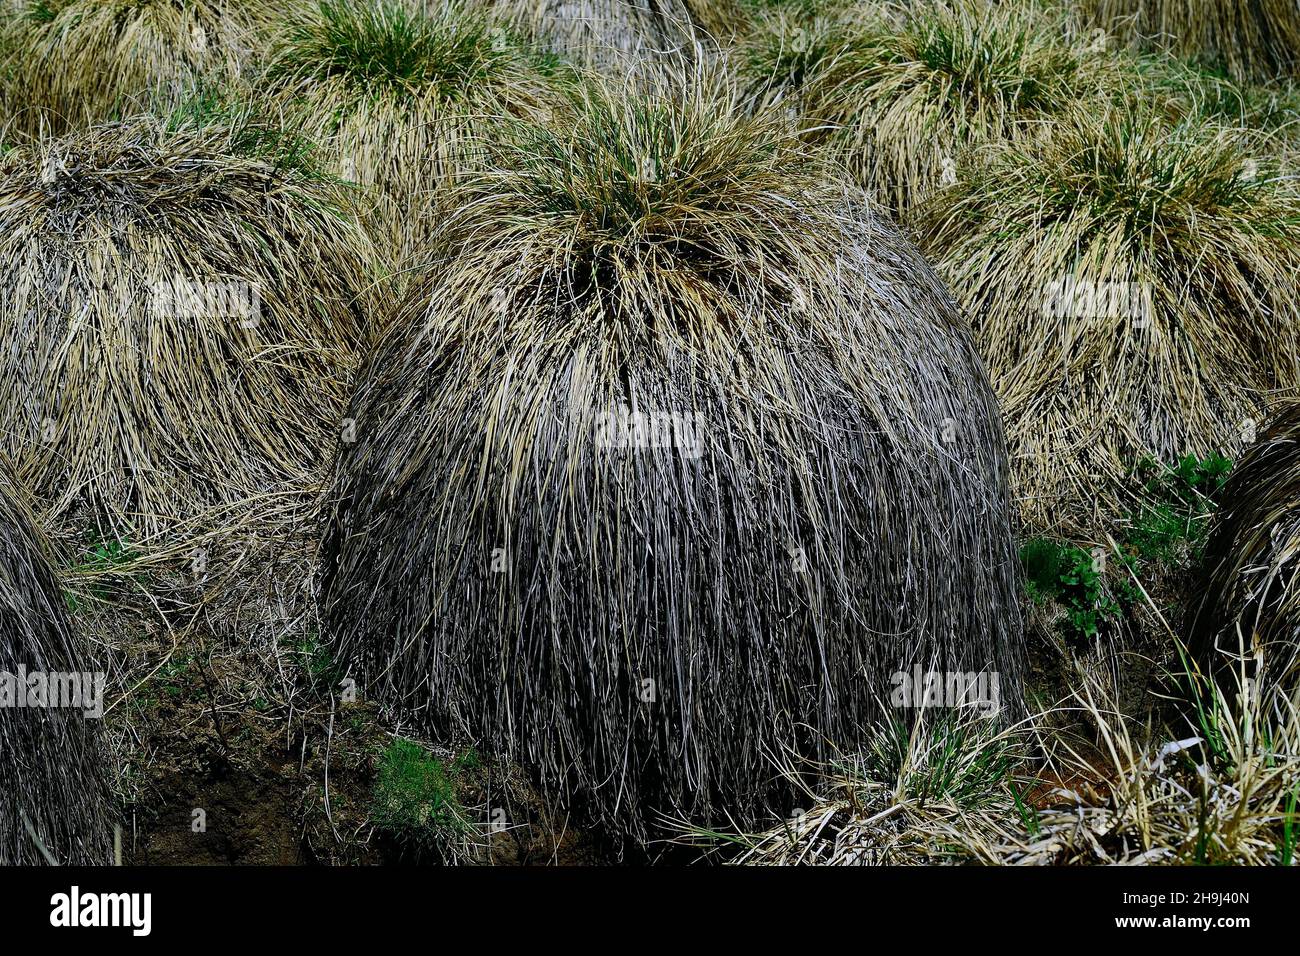 Tillers of the Juncias Carex SPS - belonging to the sedge family. Stock Photo